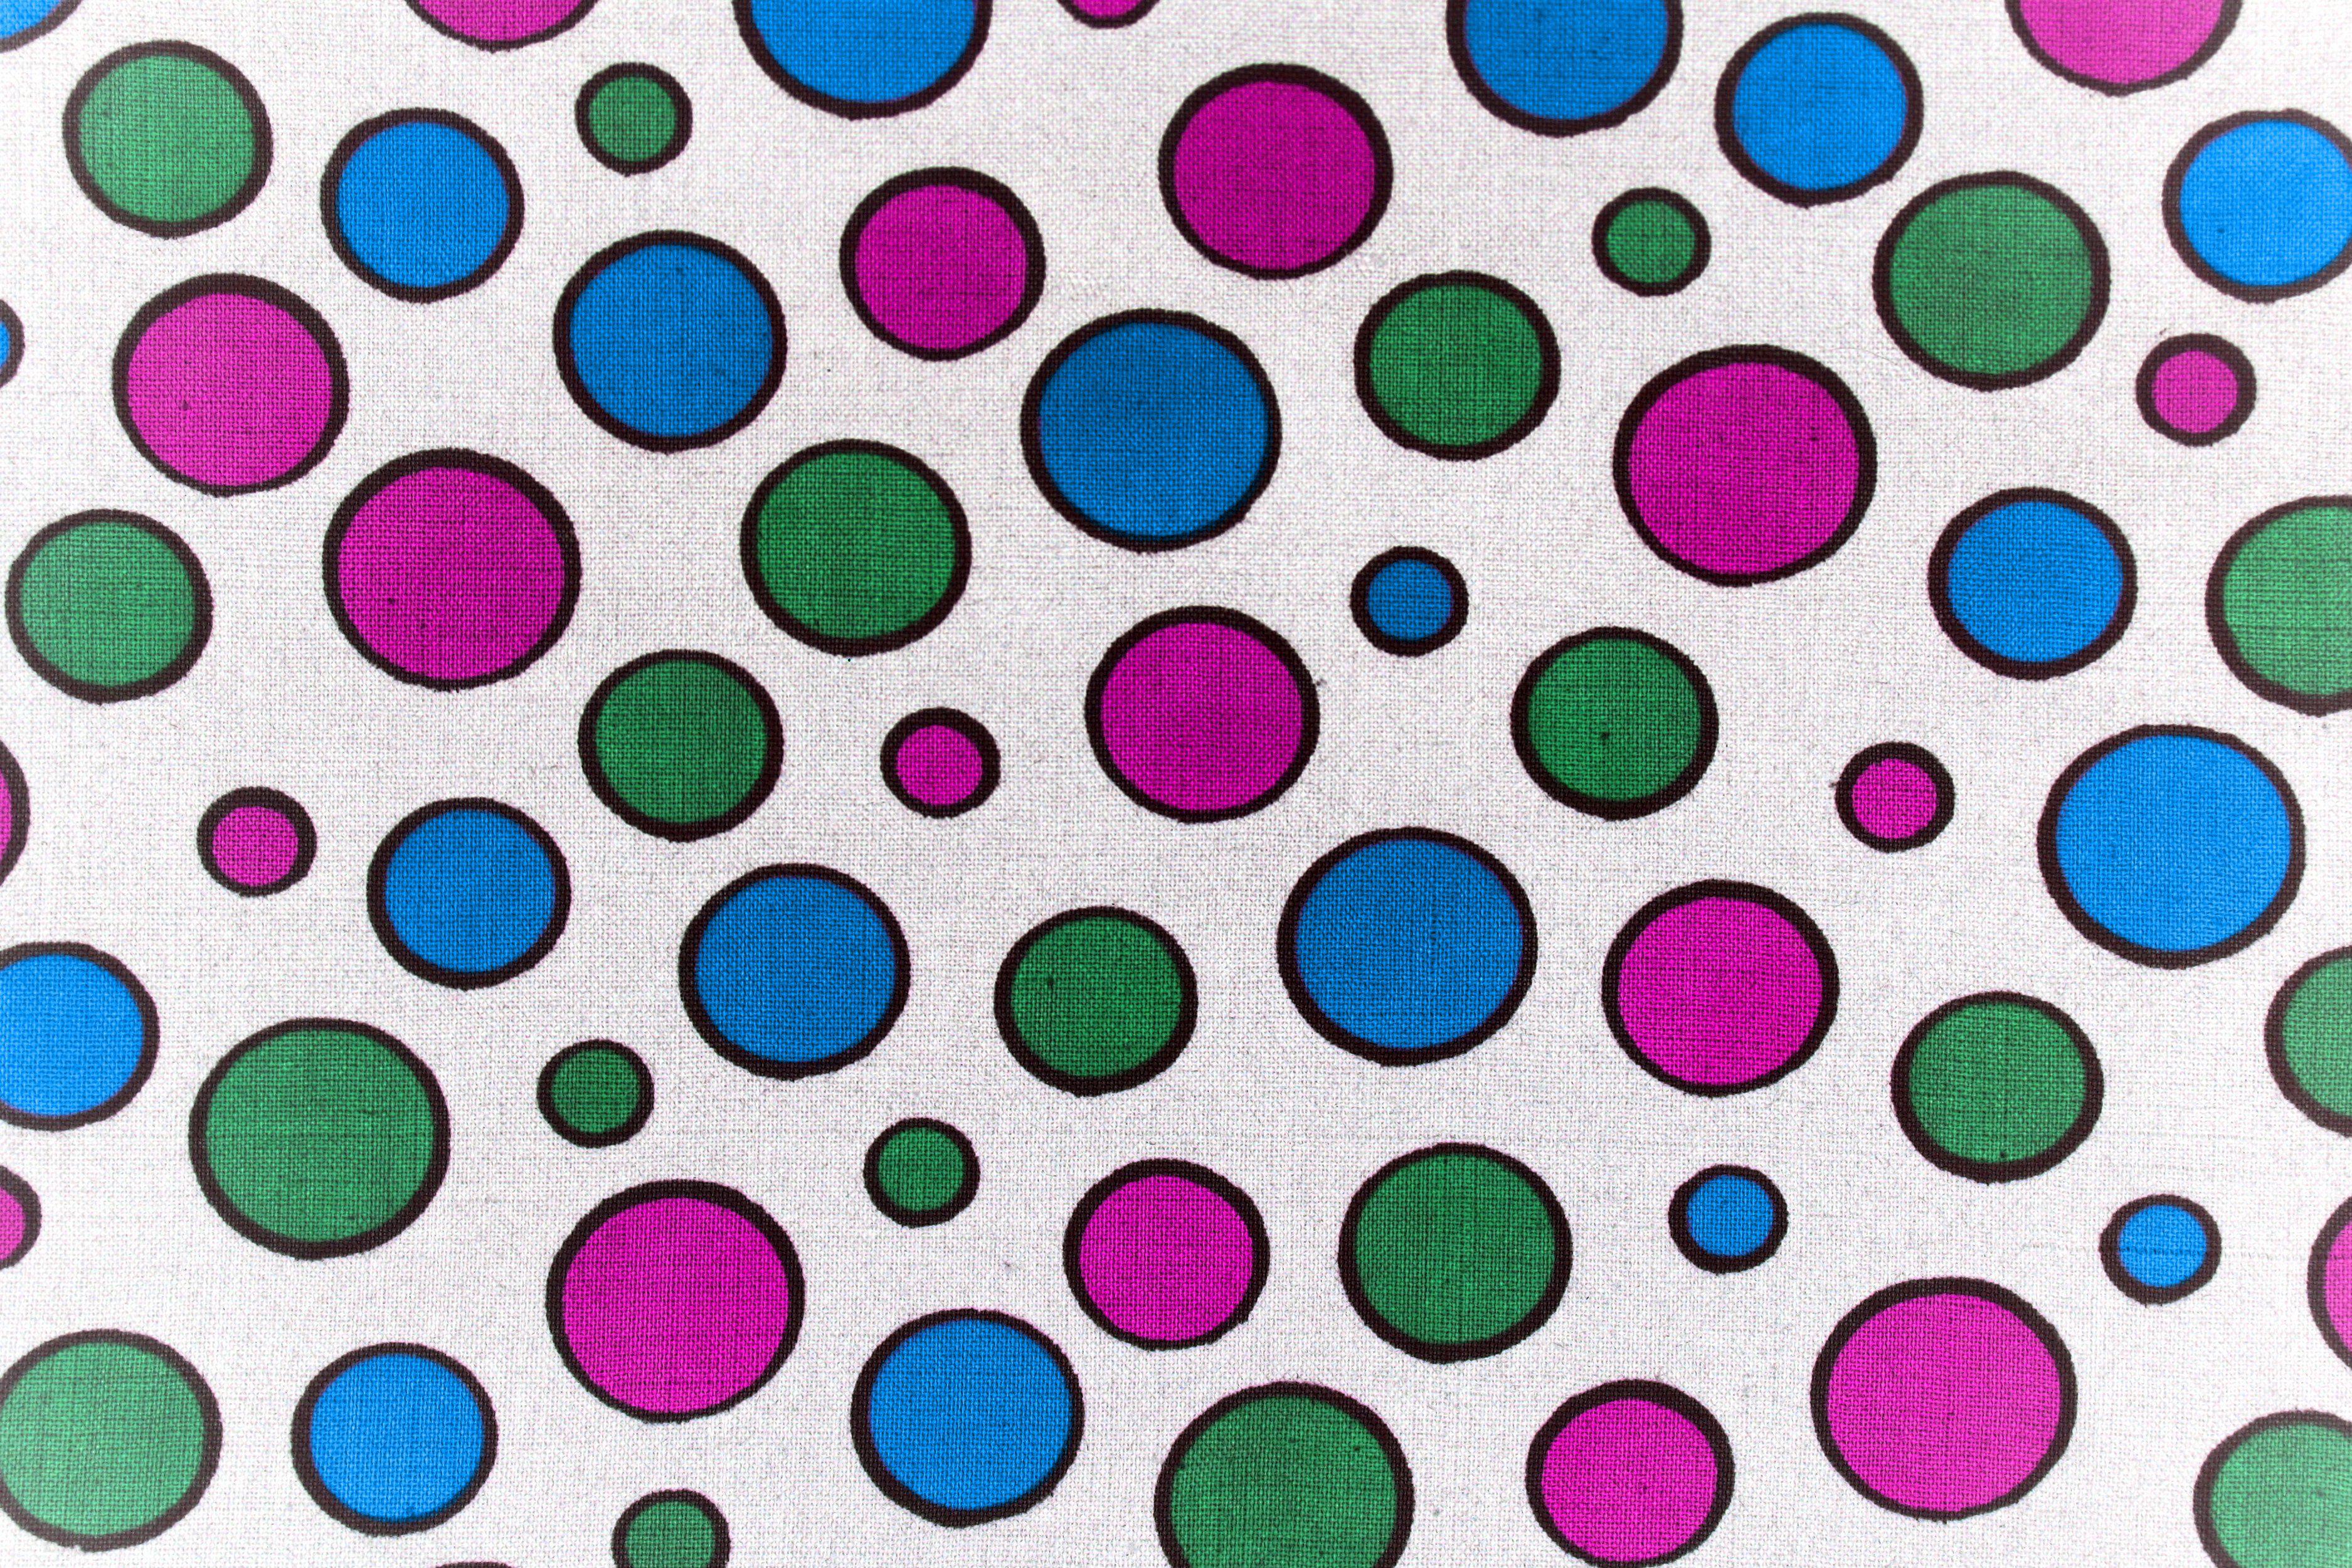 White and Blue Dot Logo - White Fabric with Pink, Green and Blue Dots Texture Picture | Free ...